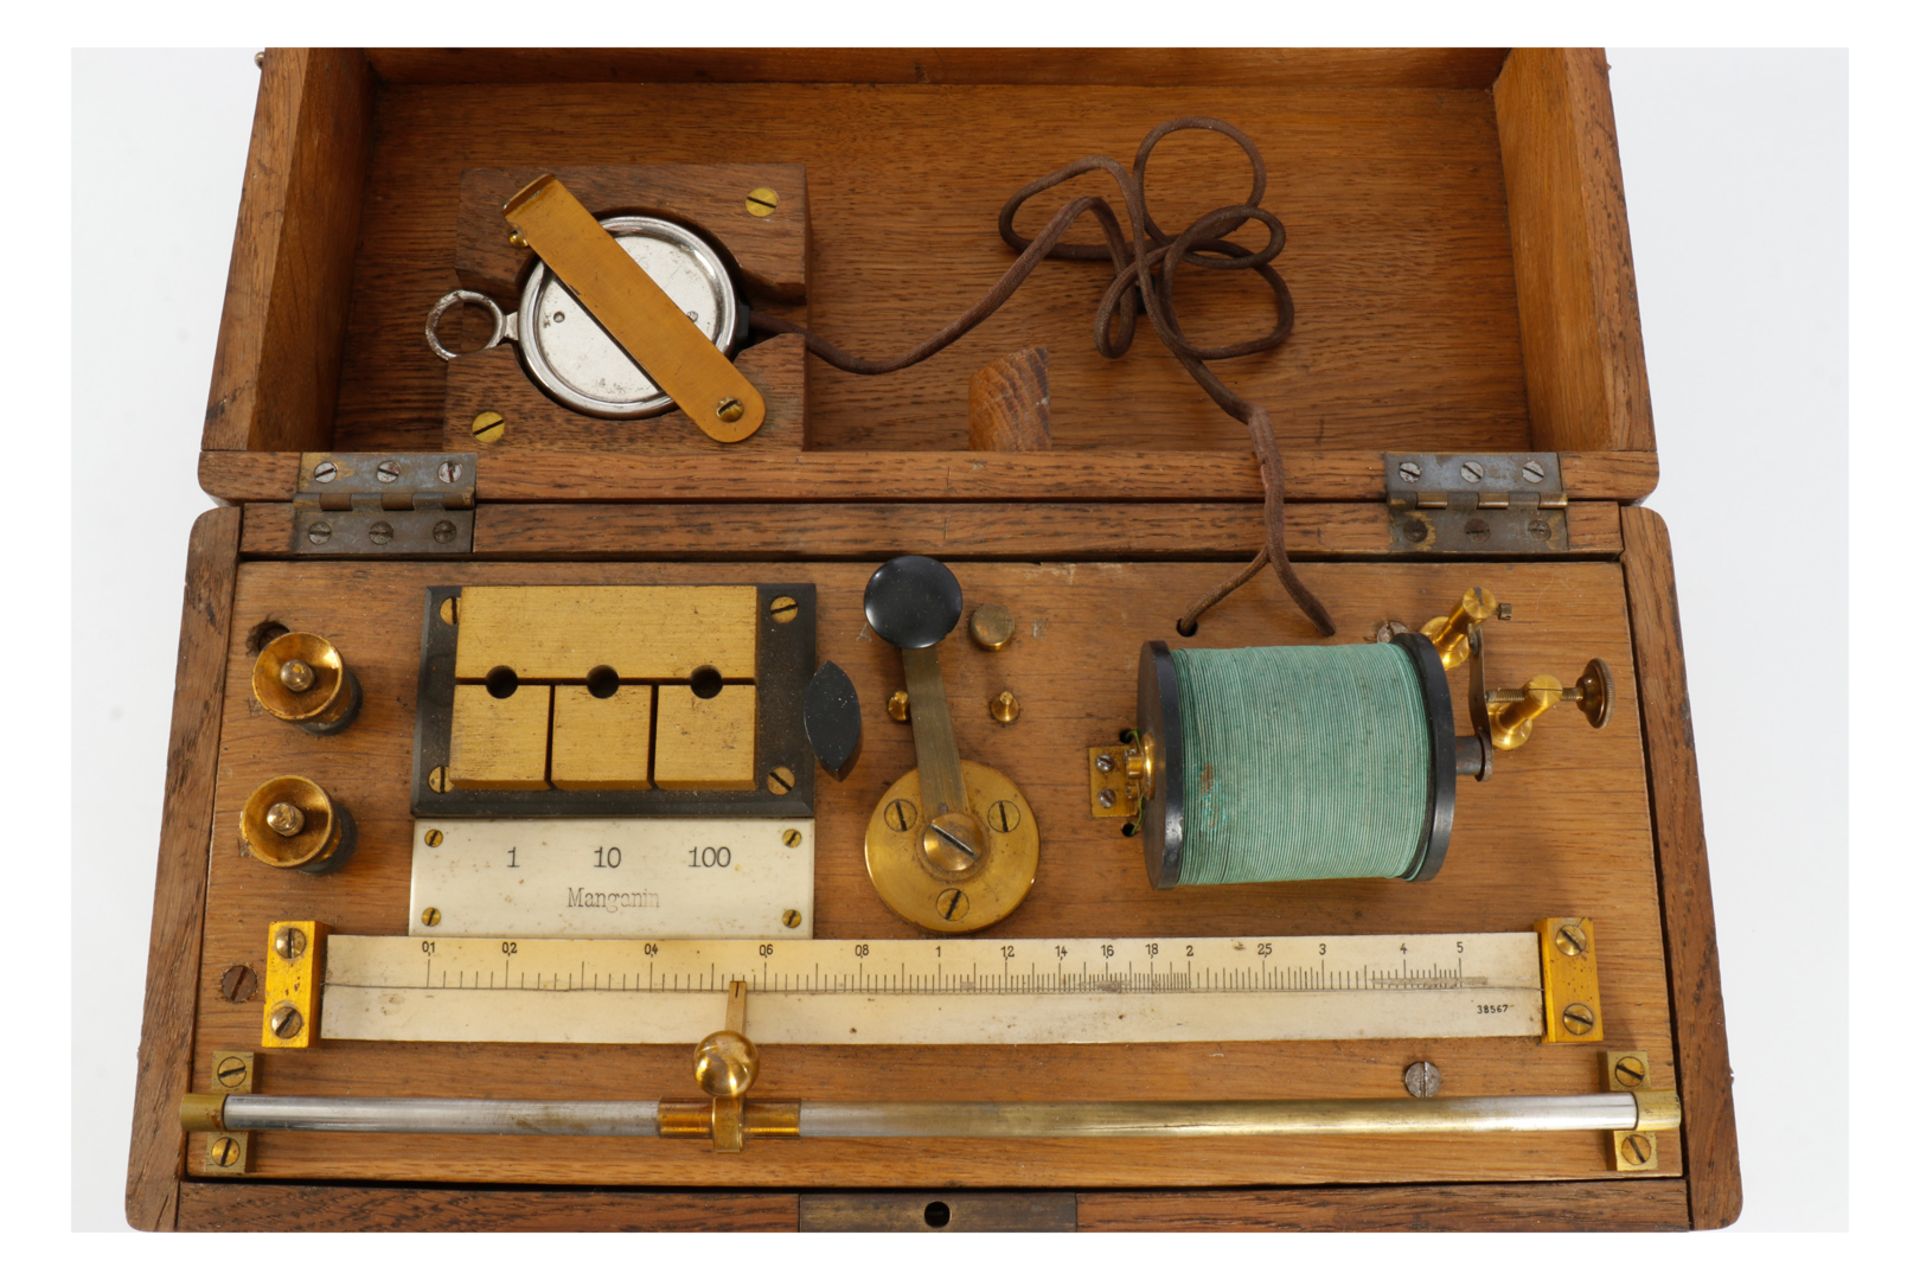 C1910 Telephone lines tester with Manganin bar and earphone - Image 2 of 3